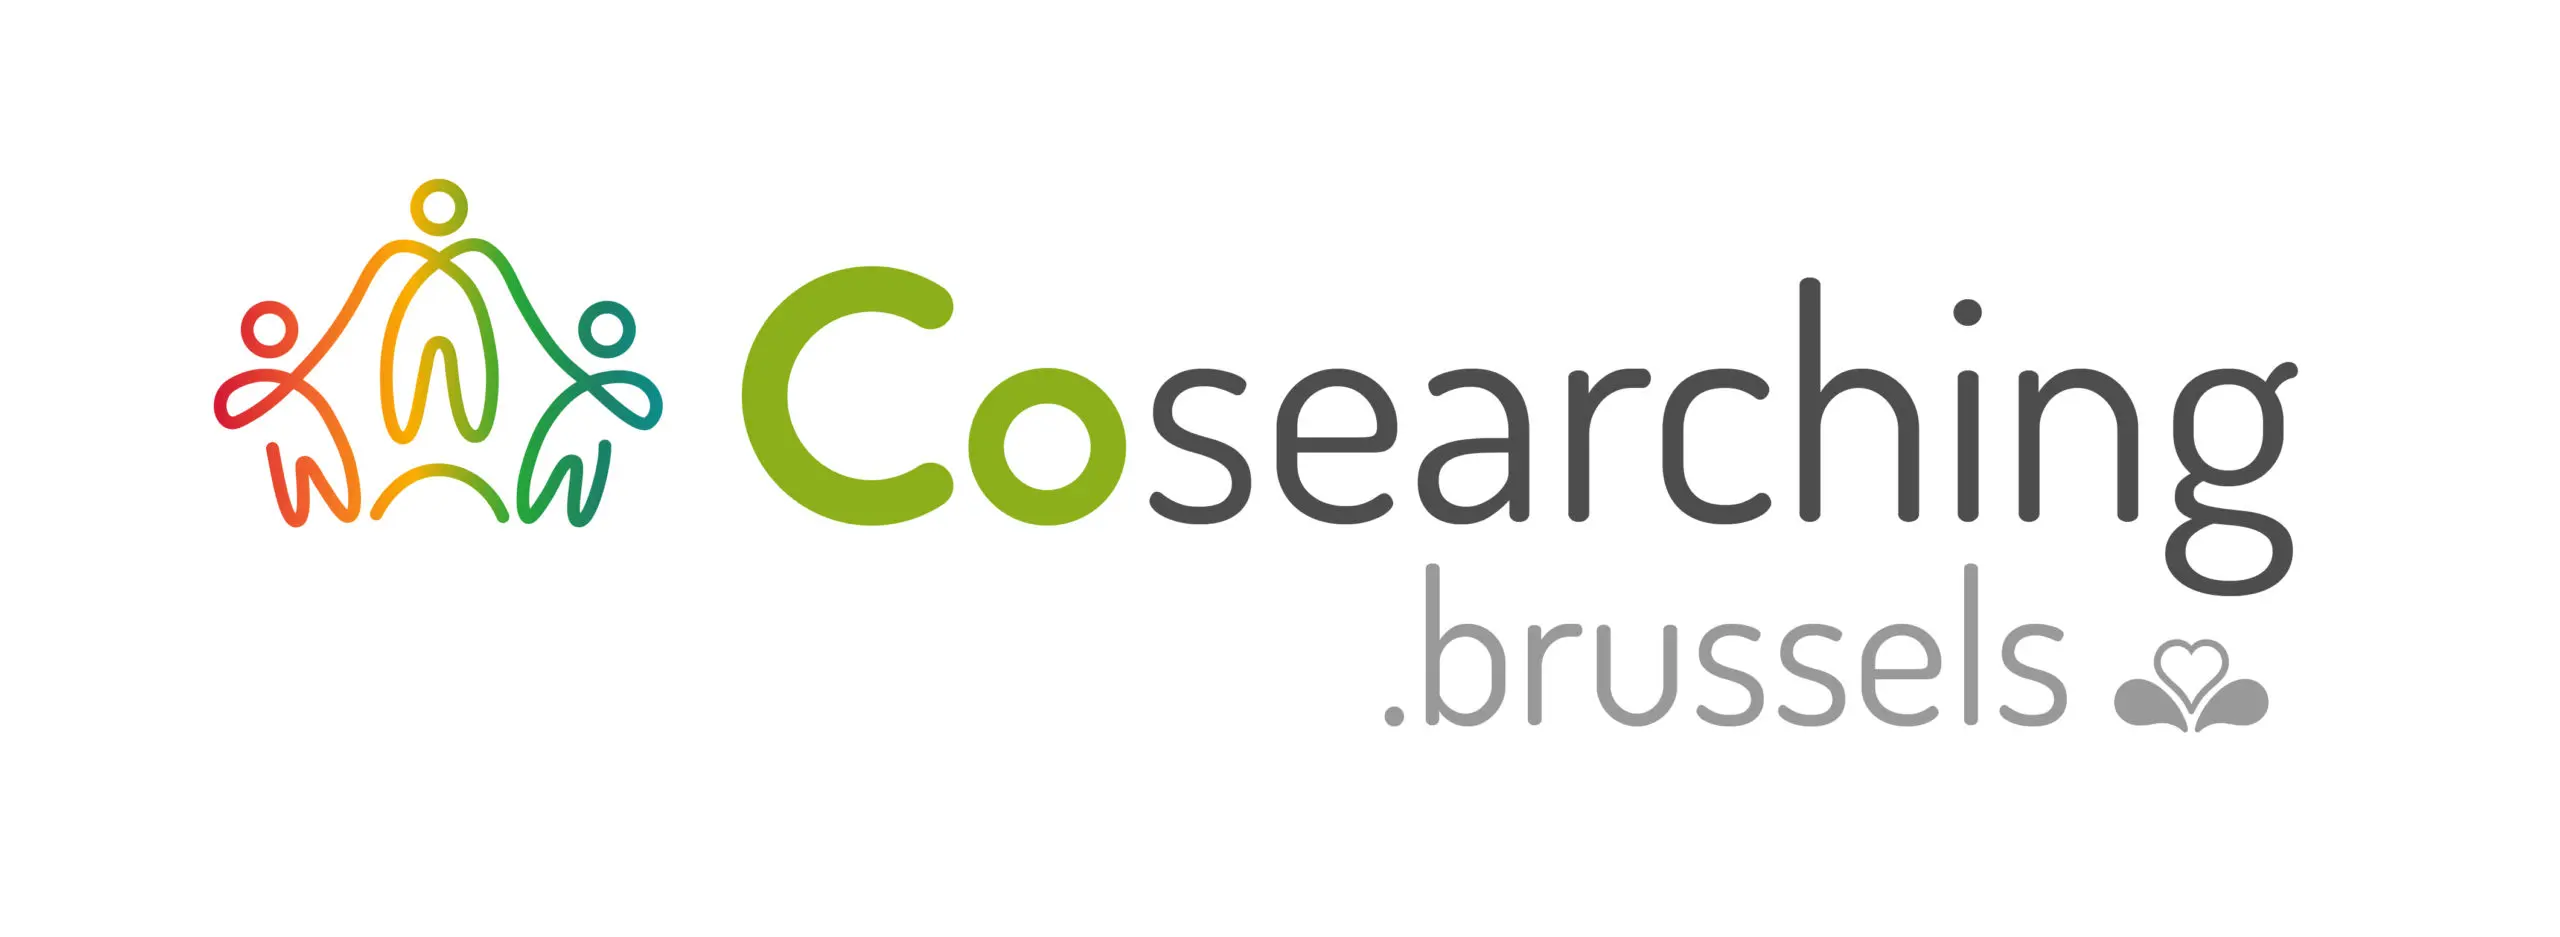 First Cosearching Center in Brussels